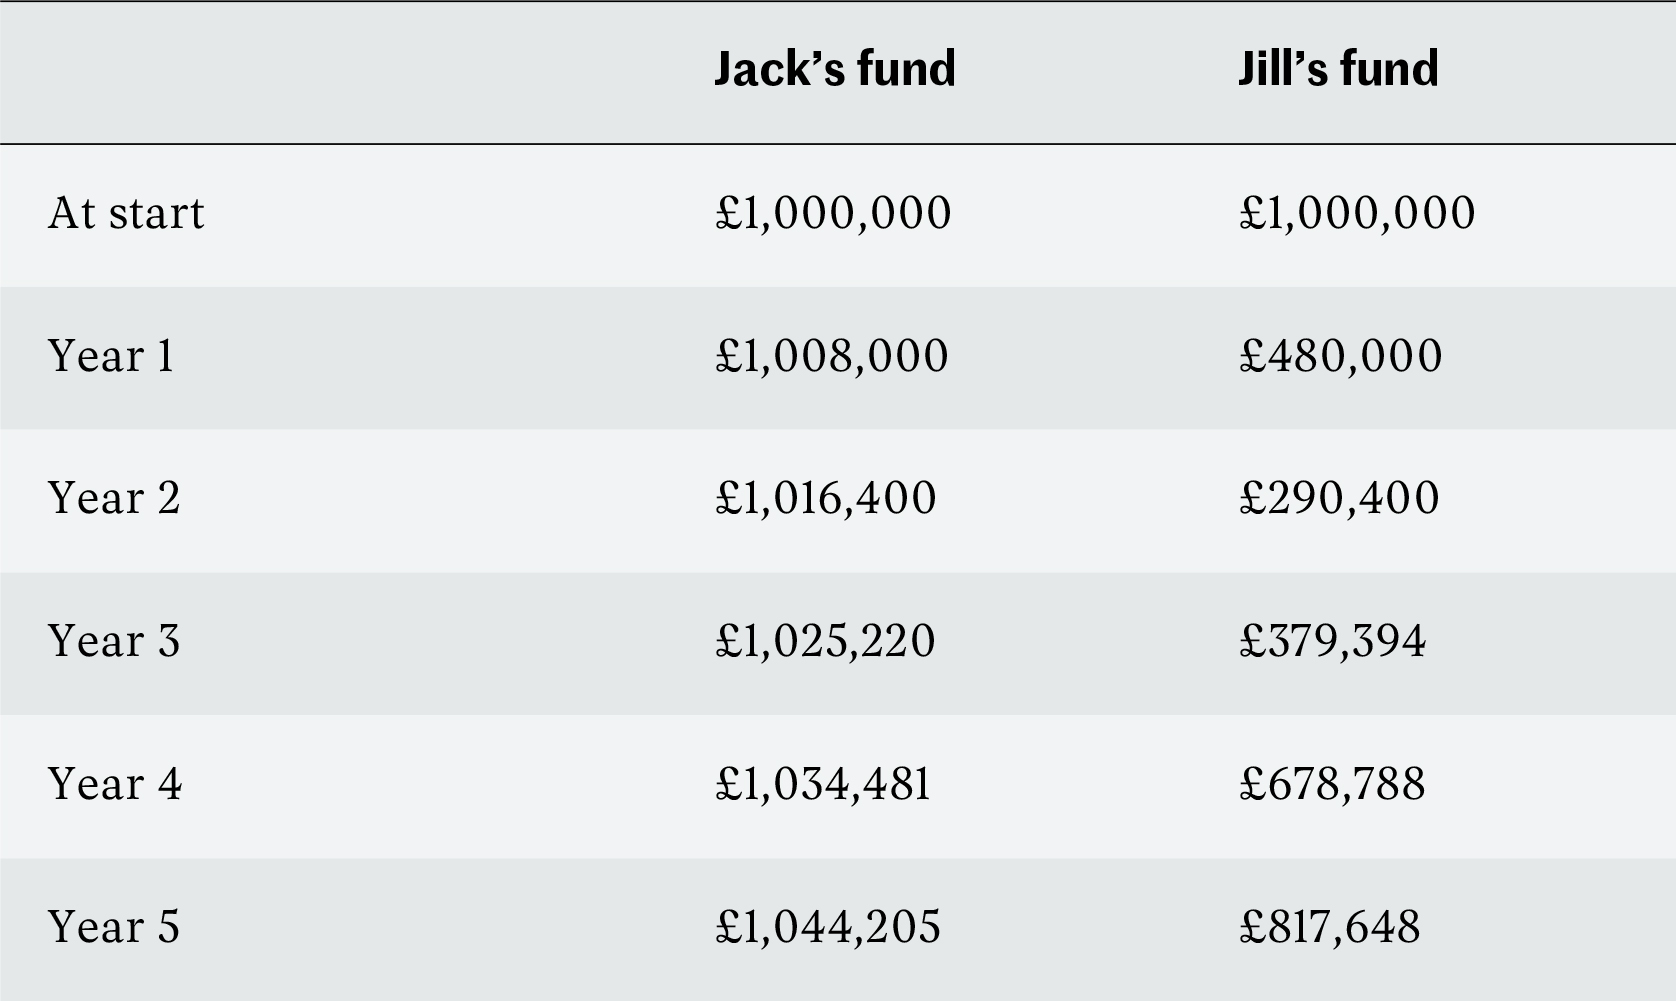 Jack and Jill £1000000 fund values